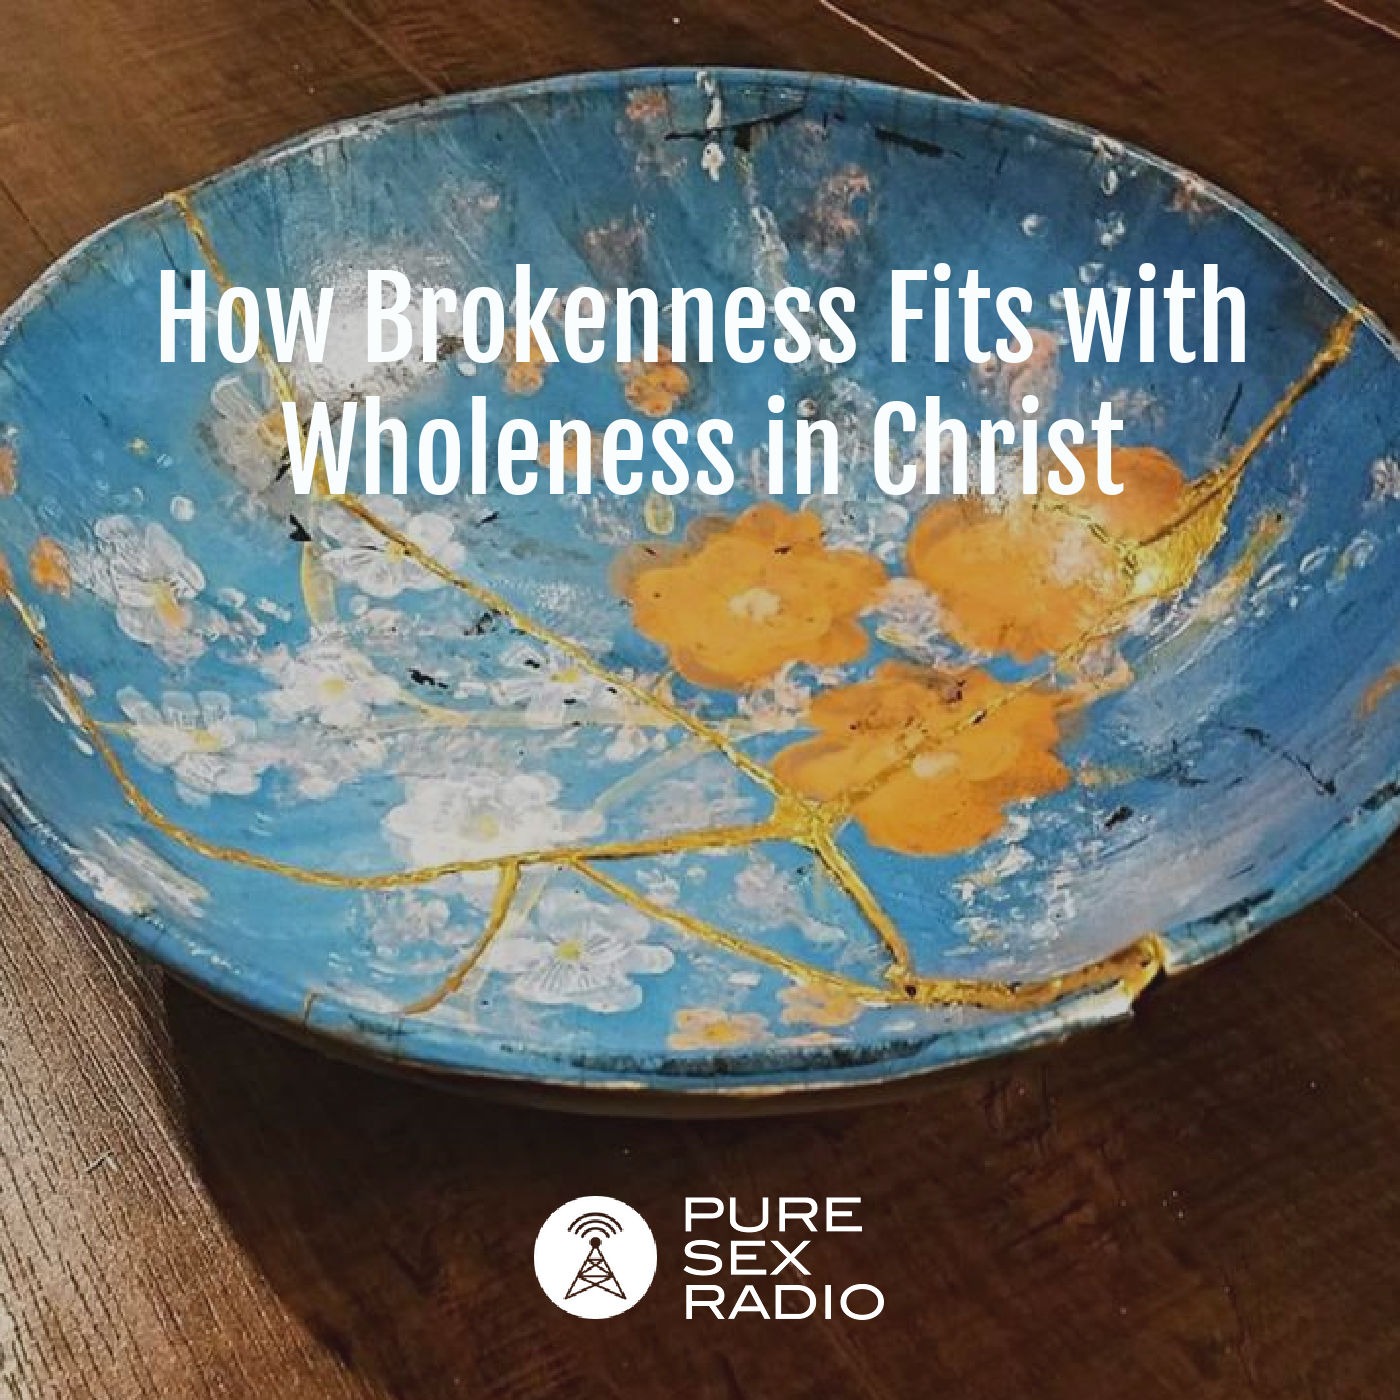 How Brokenness Fits with Wholeness in Christ